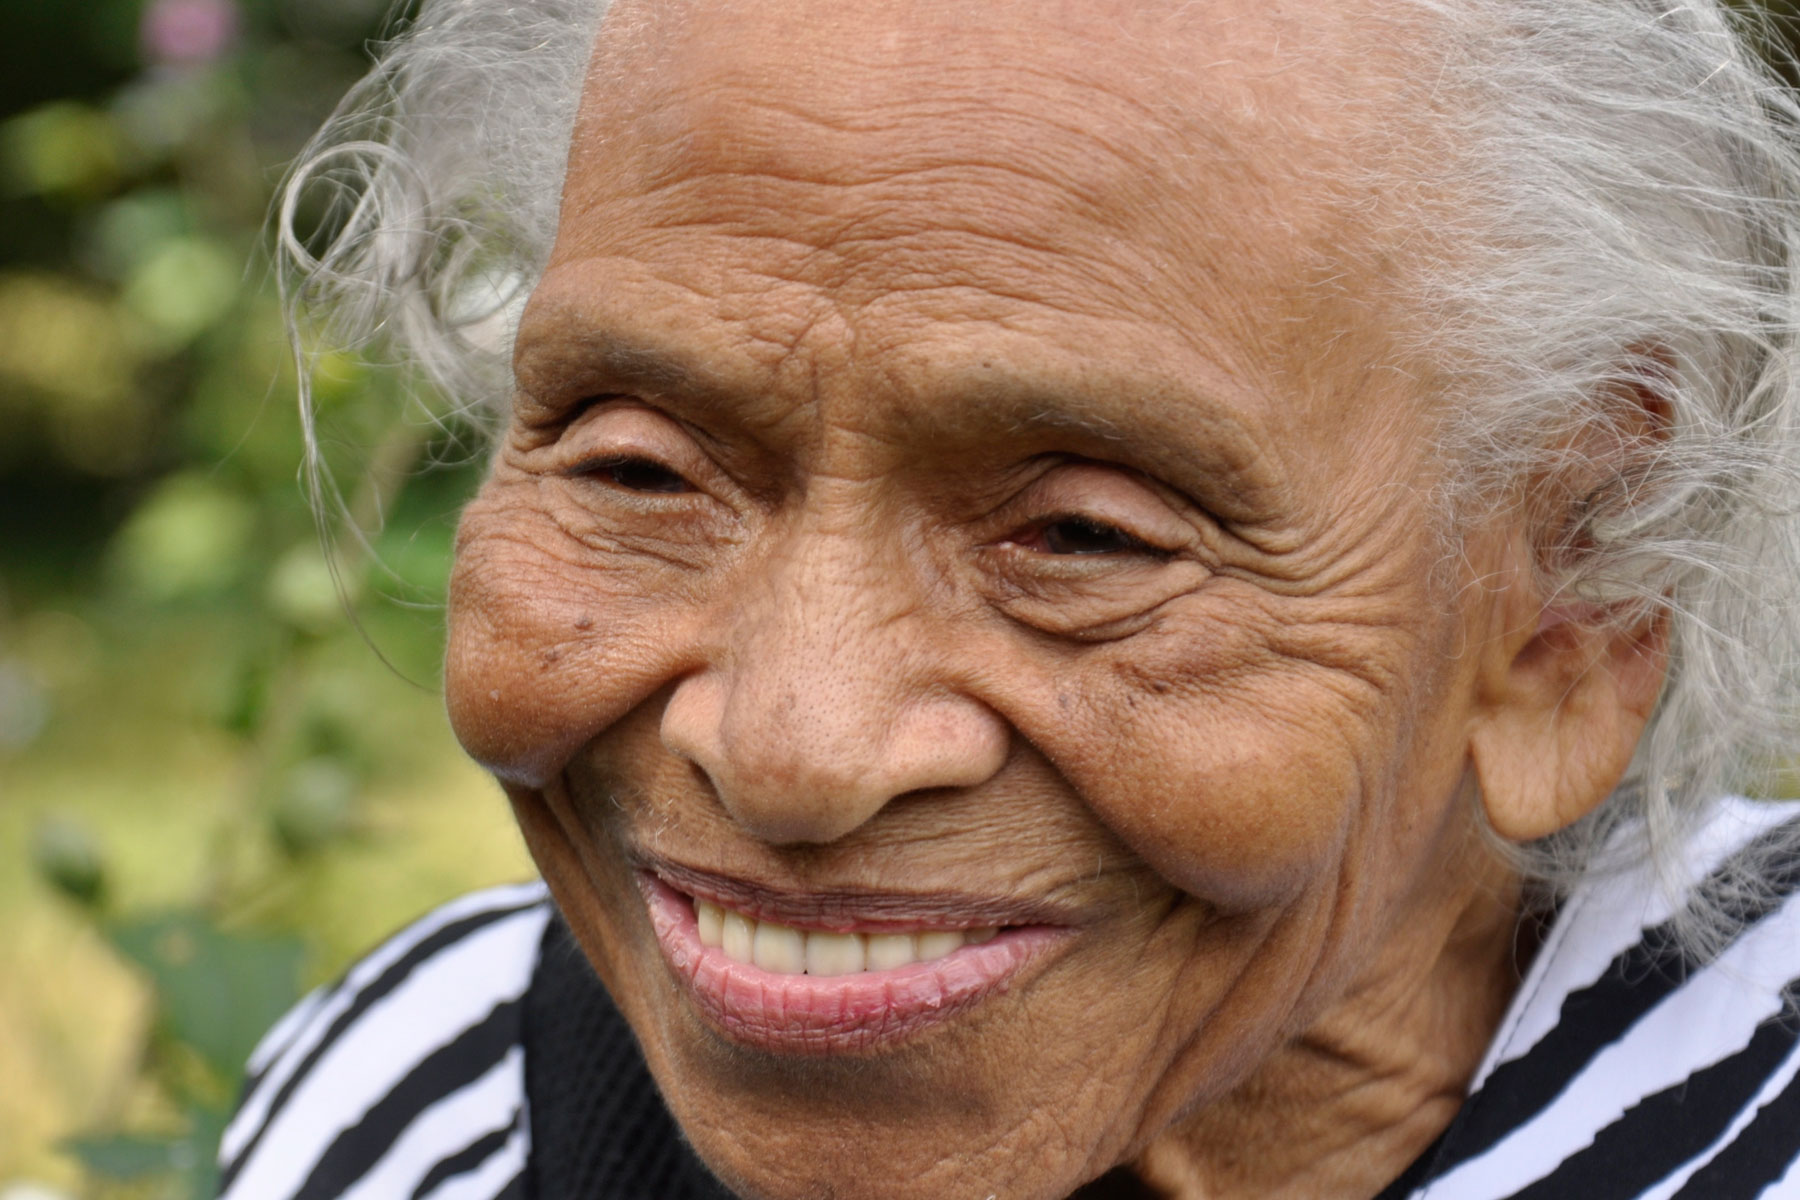 Olivia Hooker, pictured here at 98 years old, was the first African American woman to enter the U.S. Coast Guard. Also the last living survivor of the 1921, Tulsa, Oklahoma Hooker is now 102 years old.